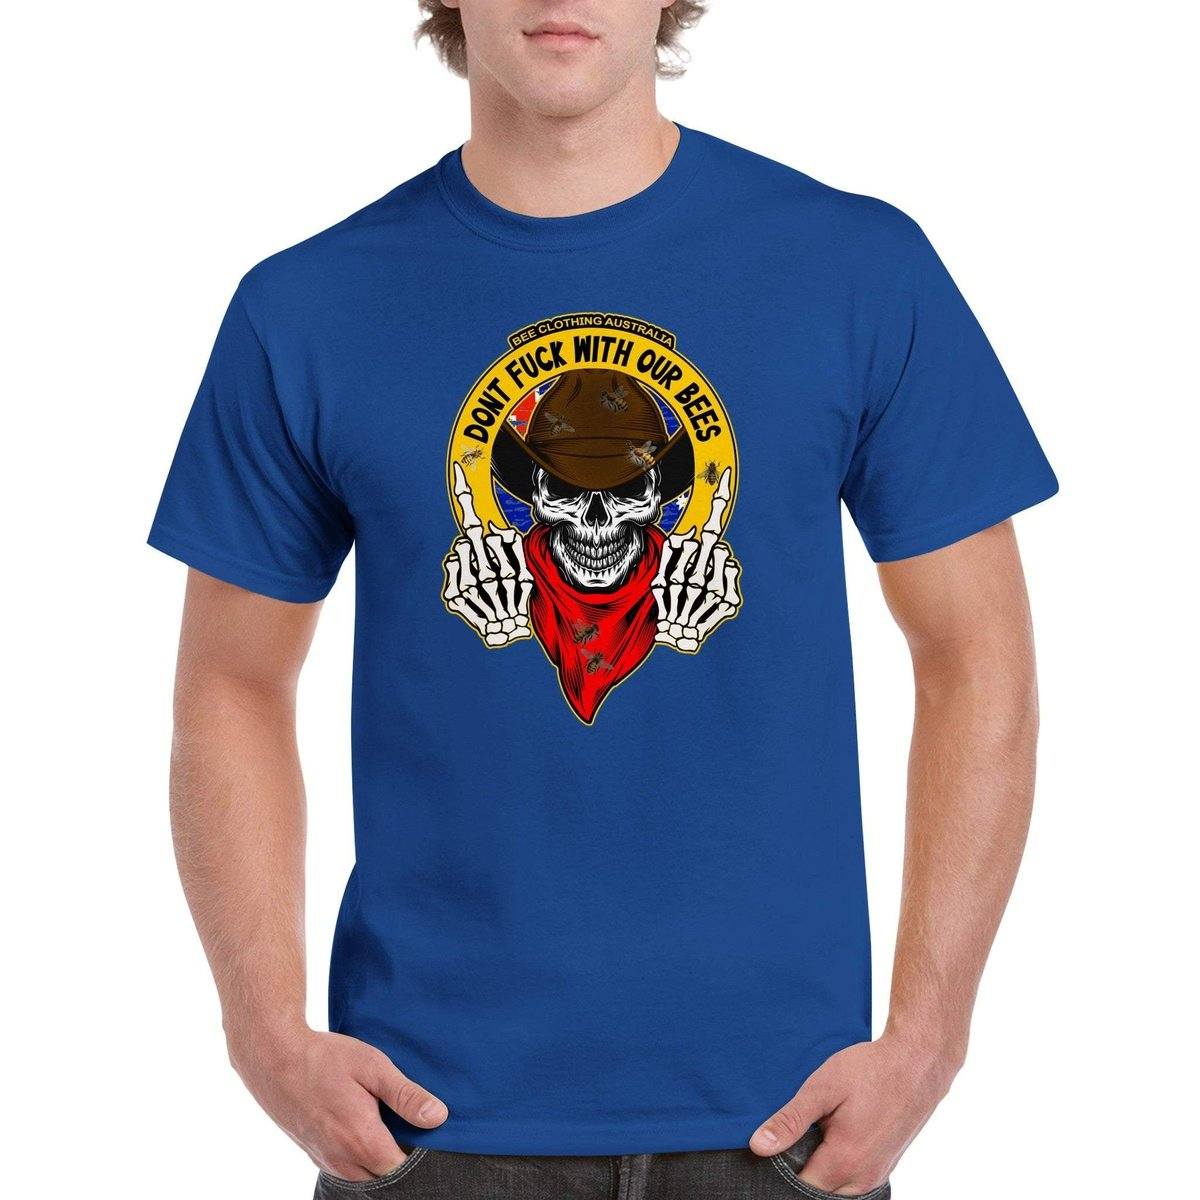 Dont Fuck With Our Bees T-Shirt - beekeeper Tshirt - Unisex Crewneck T-shirt Australia Online Color Royal / S